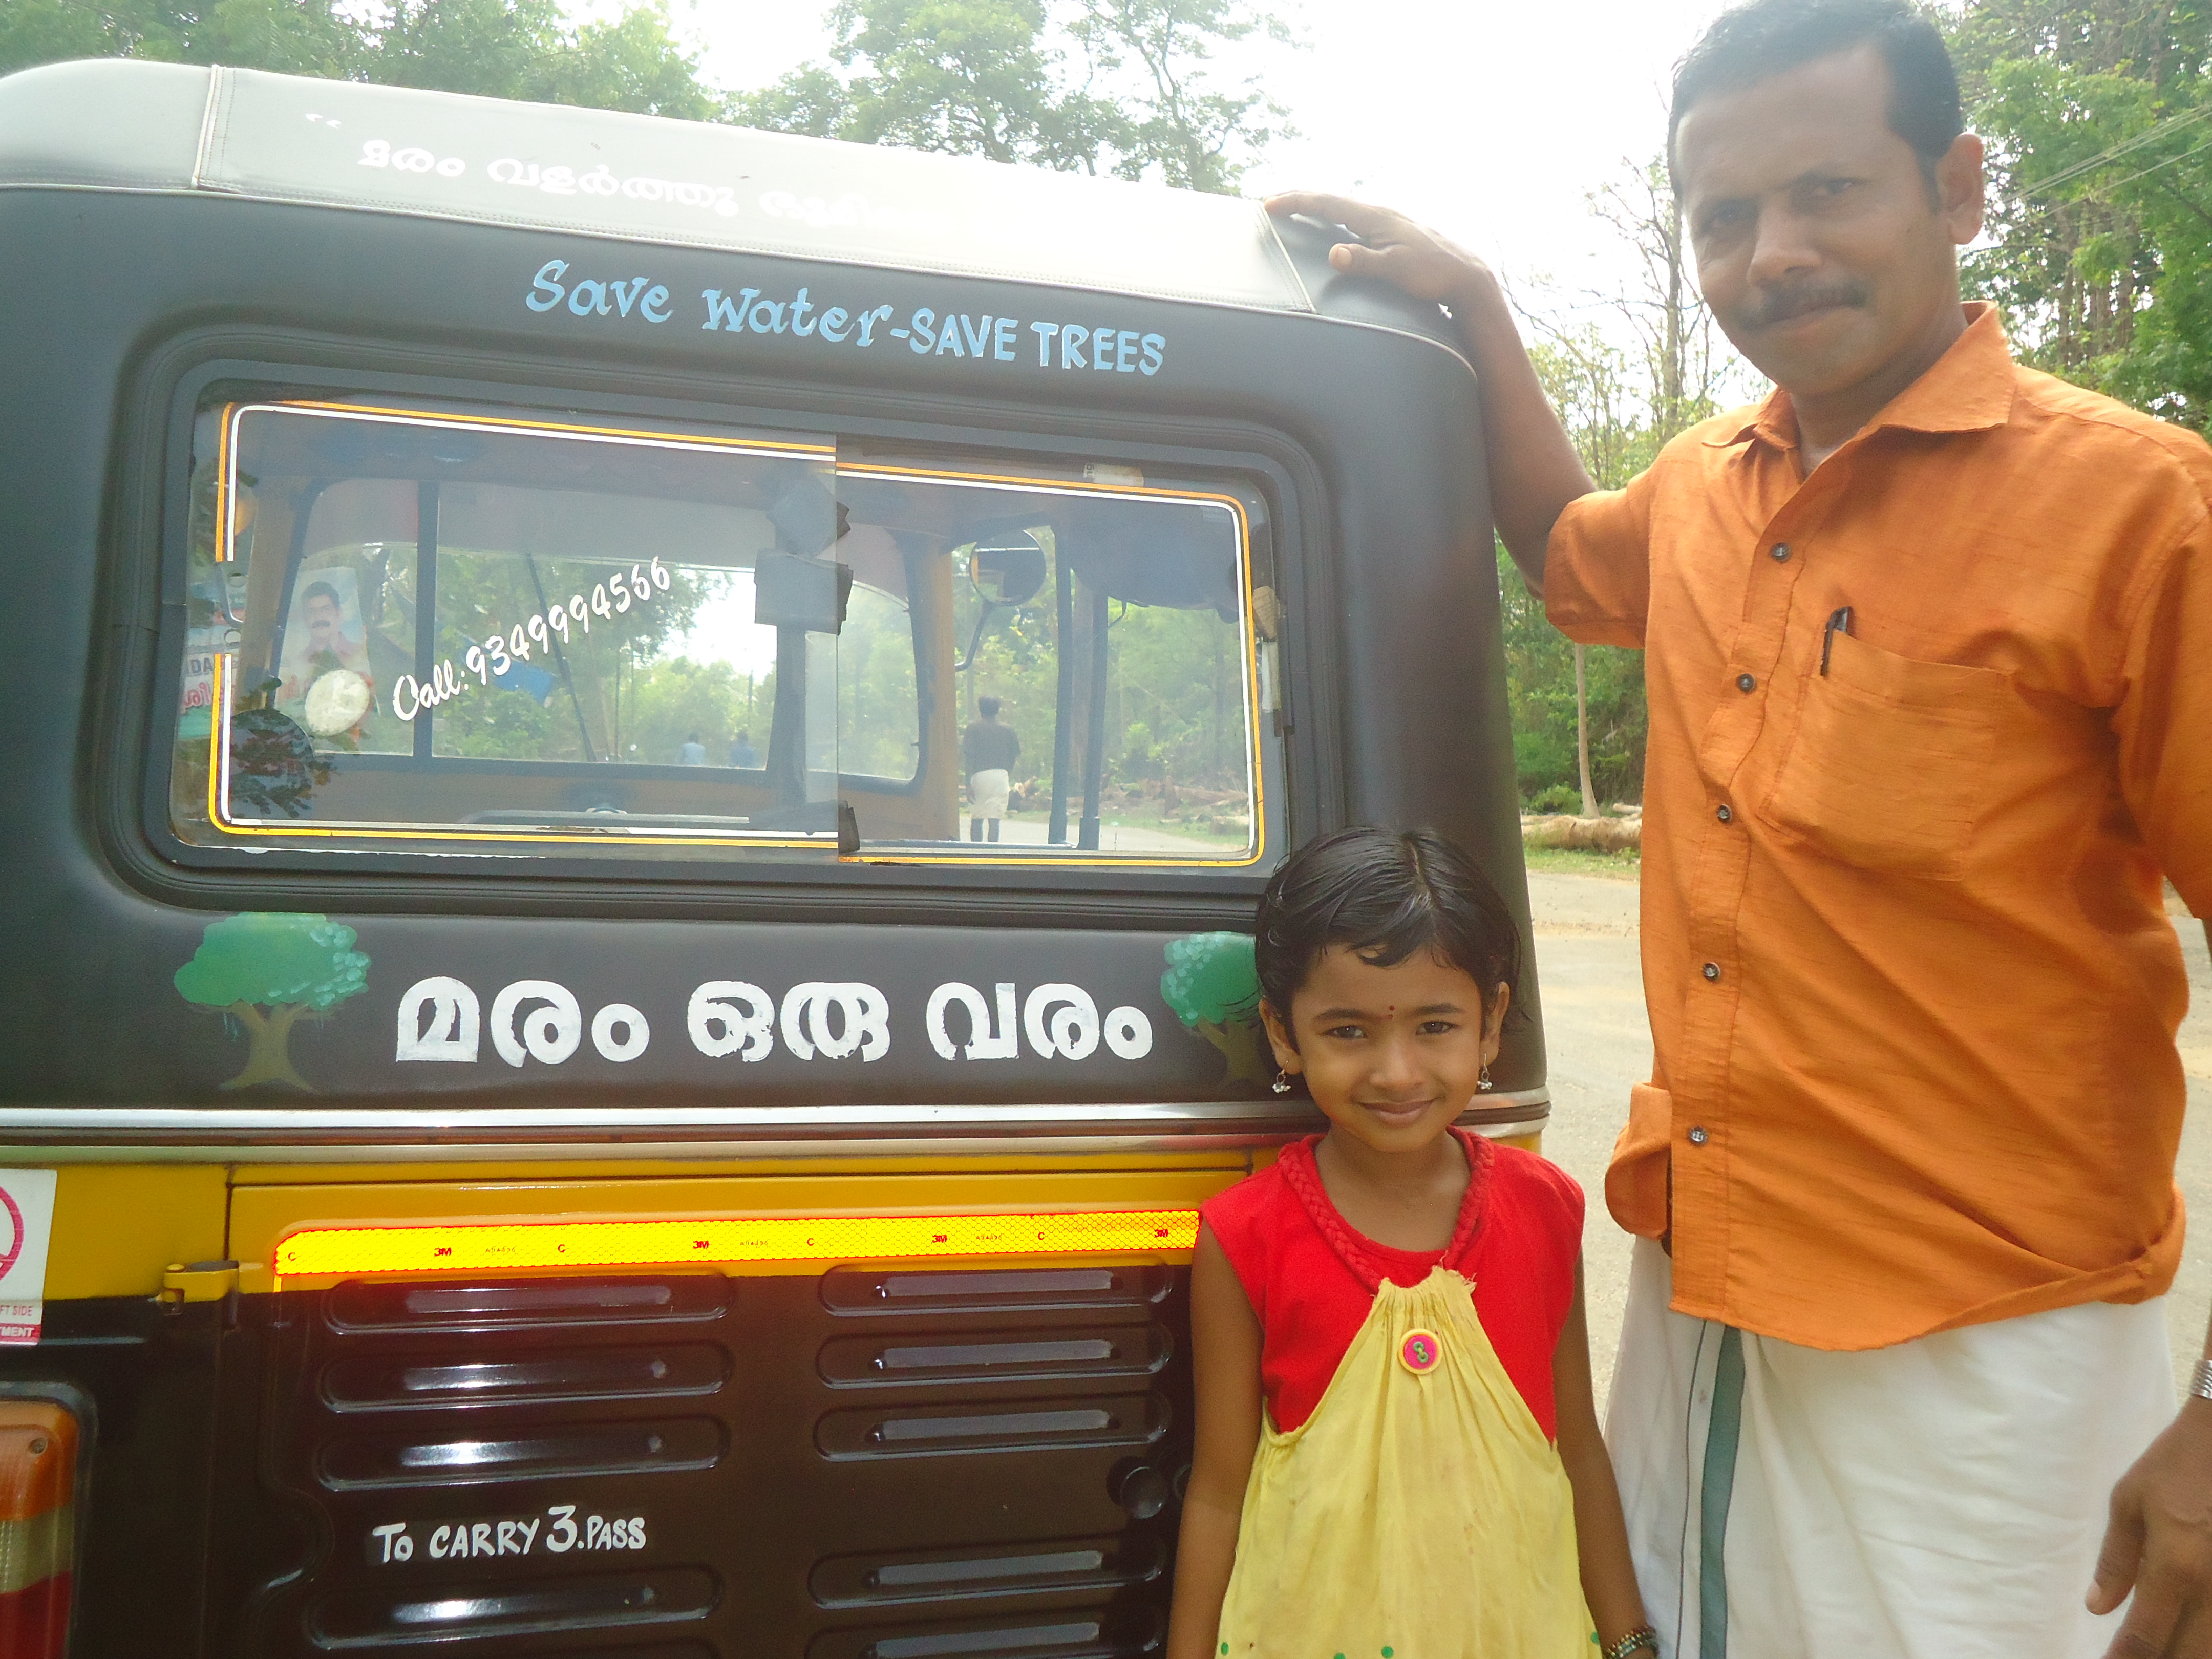 With his daughter and their vehicle